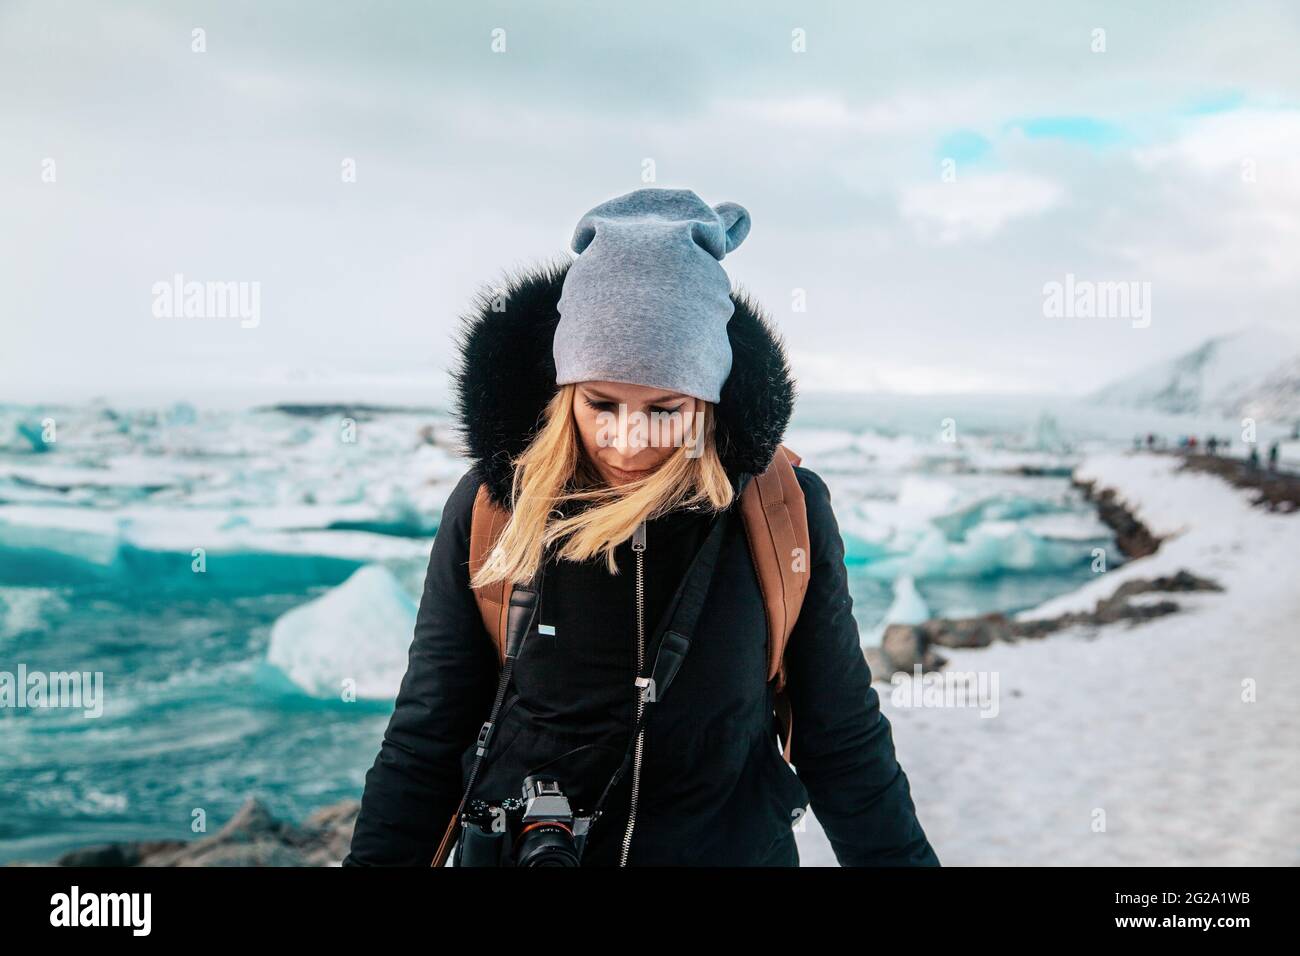 Blond haired Woman in hat and warm jacket looking down standing on shore of frozen turquoise sea and snowy coast in Iceland Stock Photo